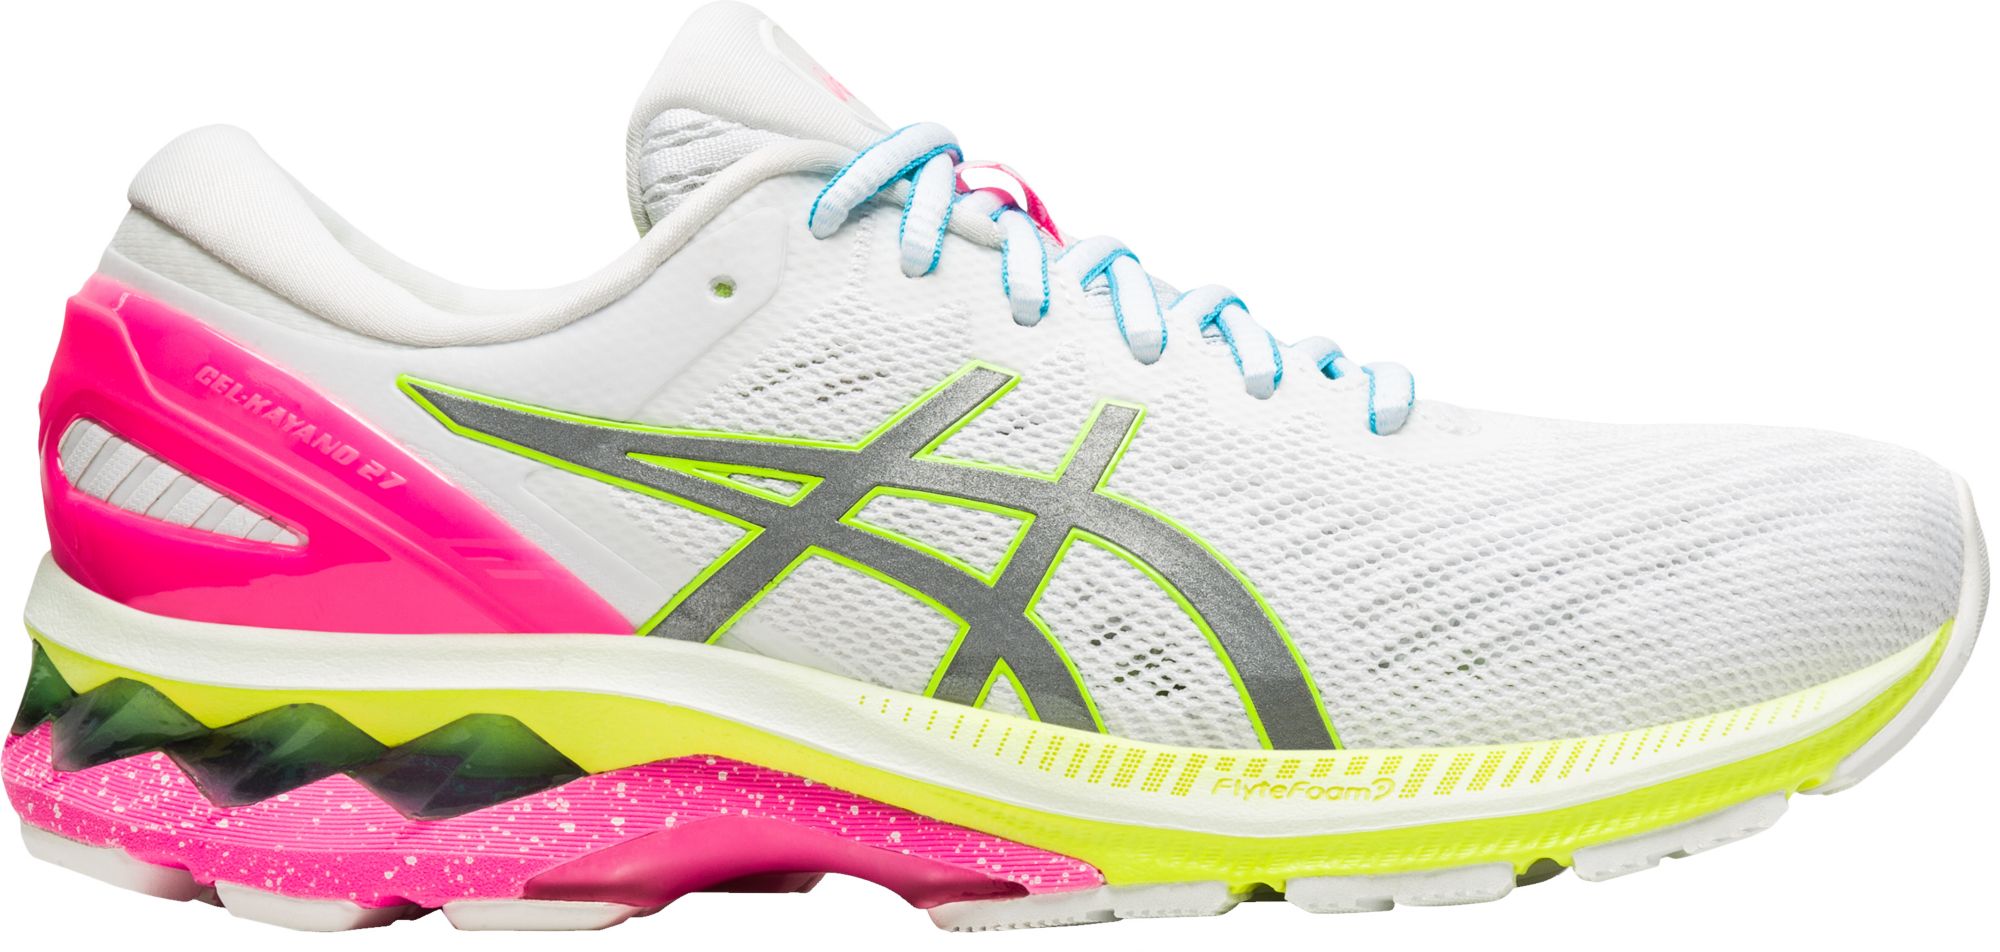 a asics women's running shoes,Save up to 18%,www.ilcascinone.com